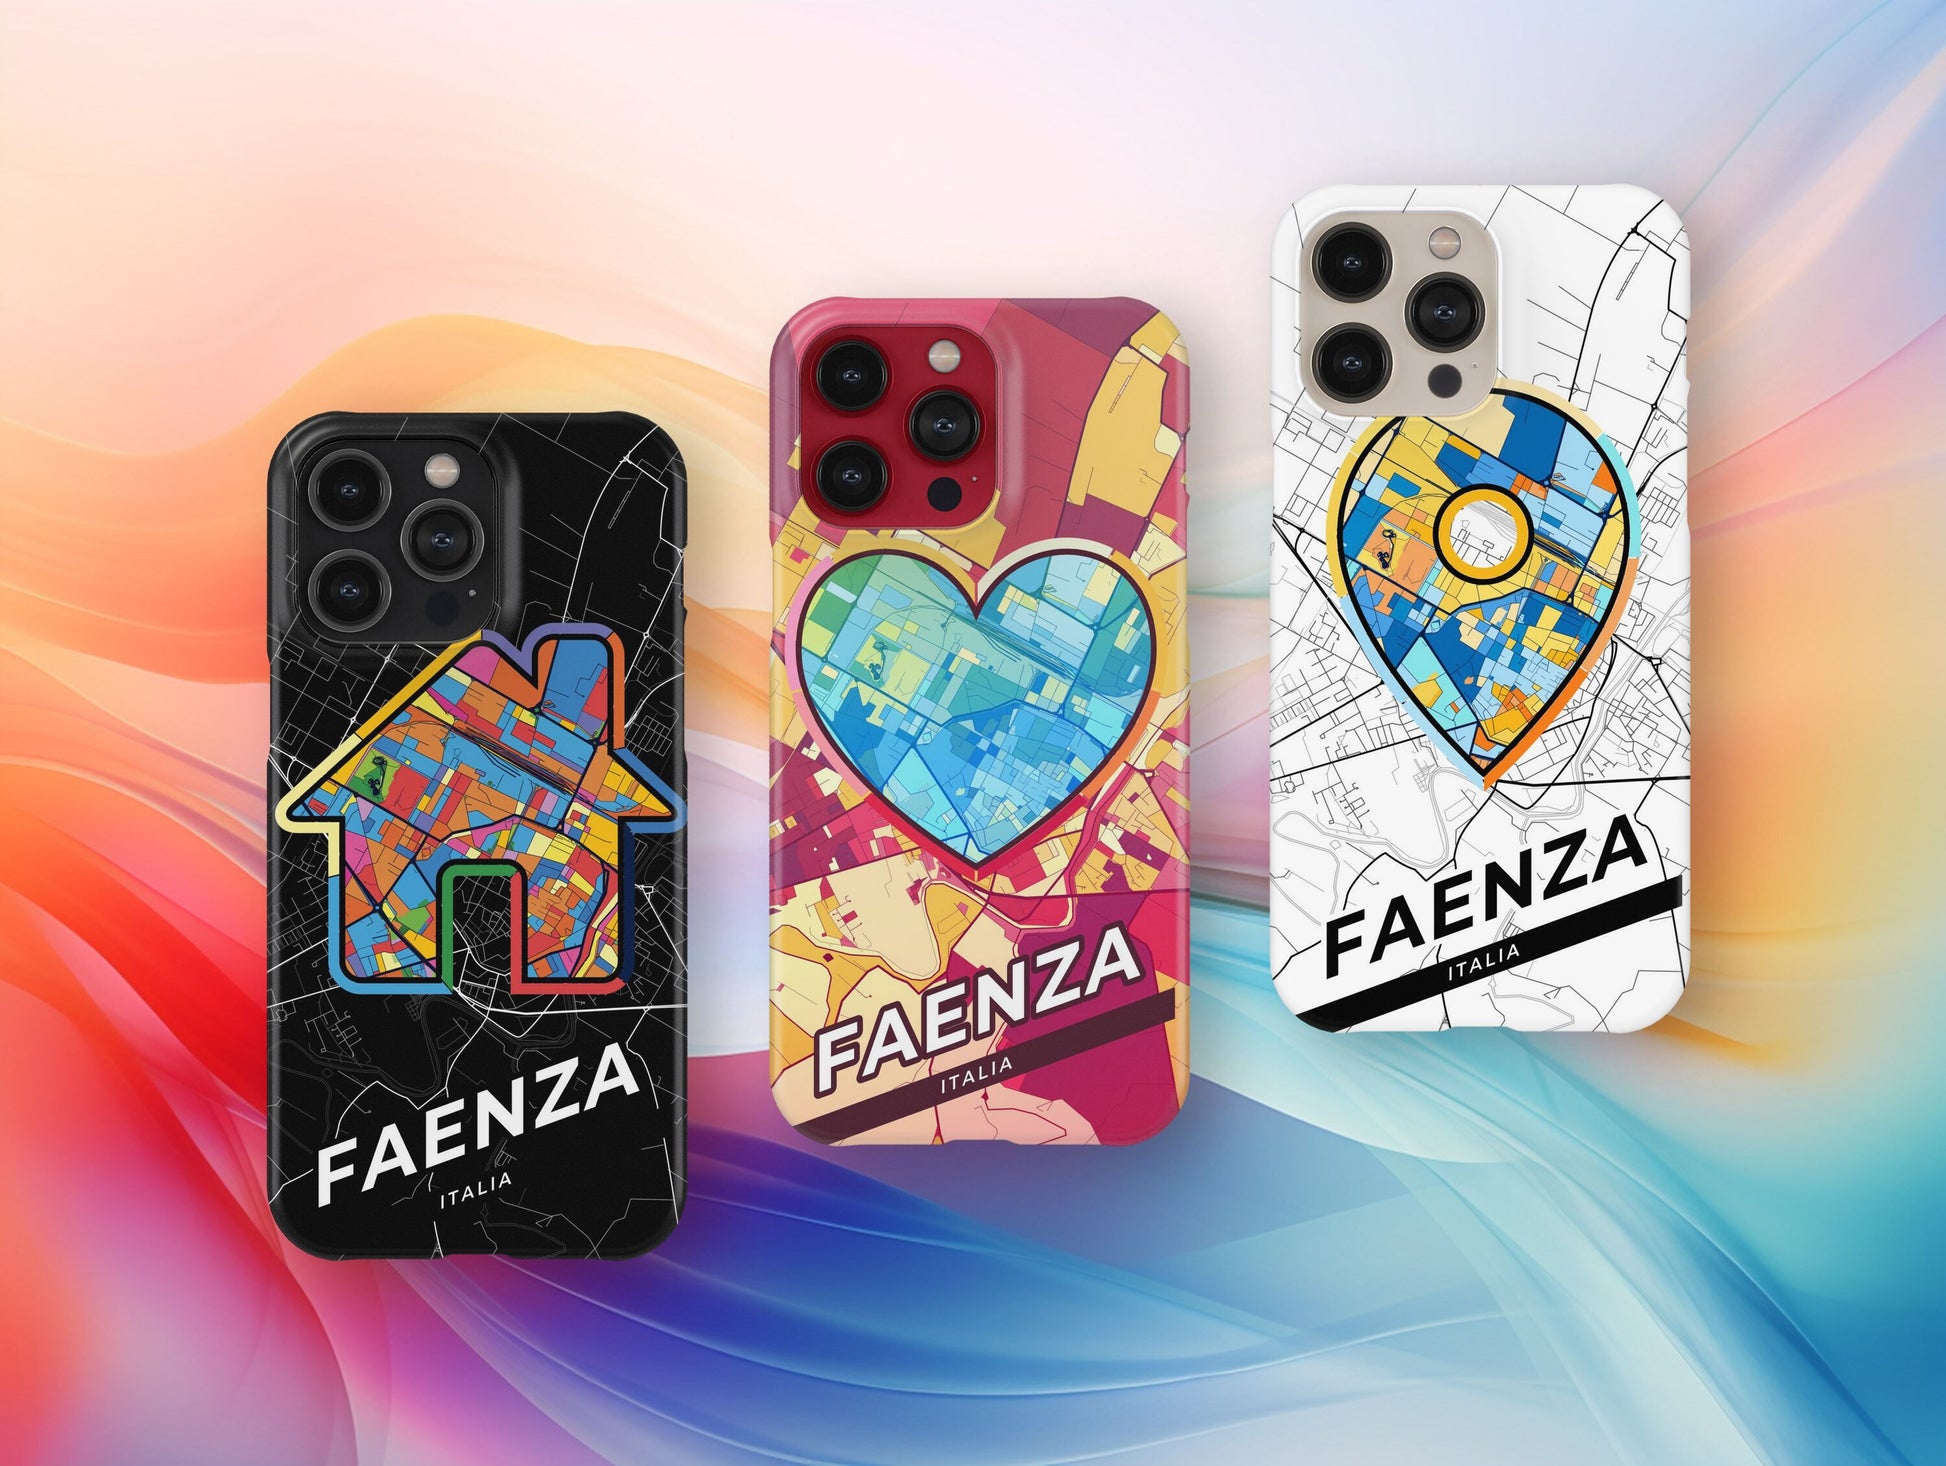 Faenza Italy slim phone case with colorful icon. Birthday, wedding or housewarming gift. Couple match cases.